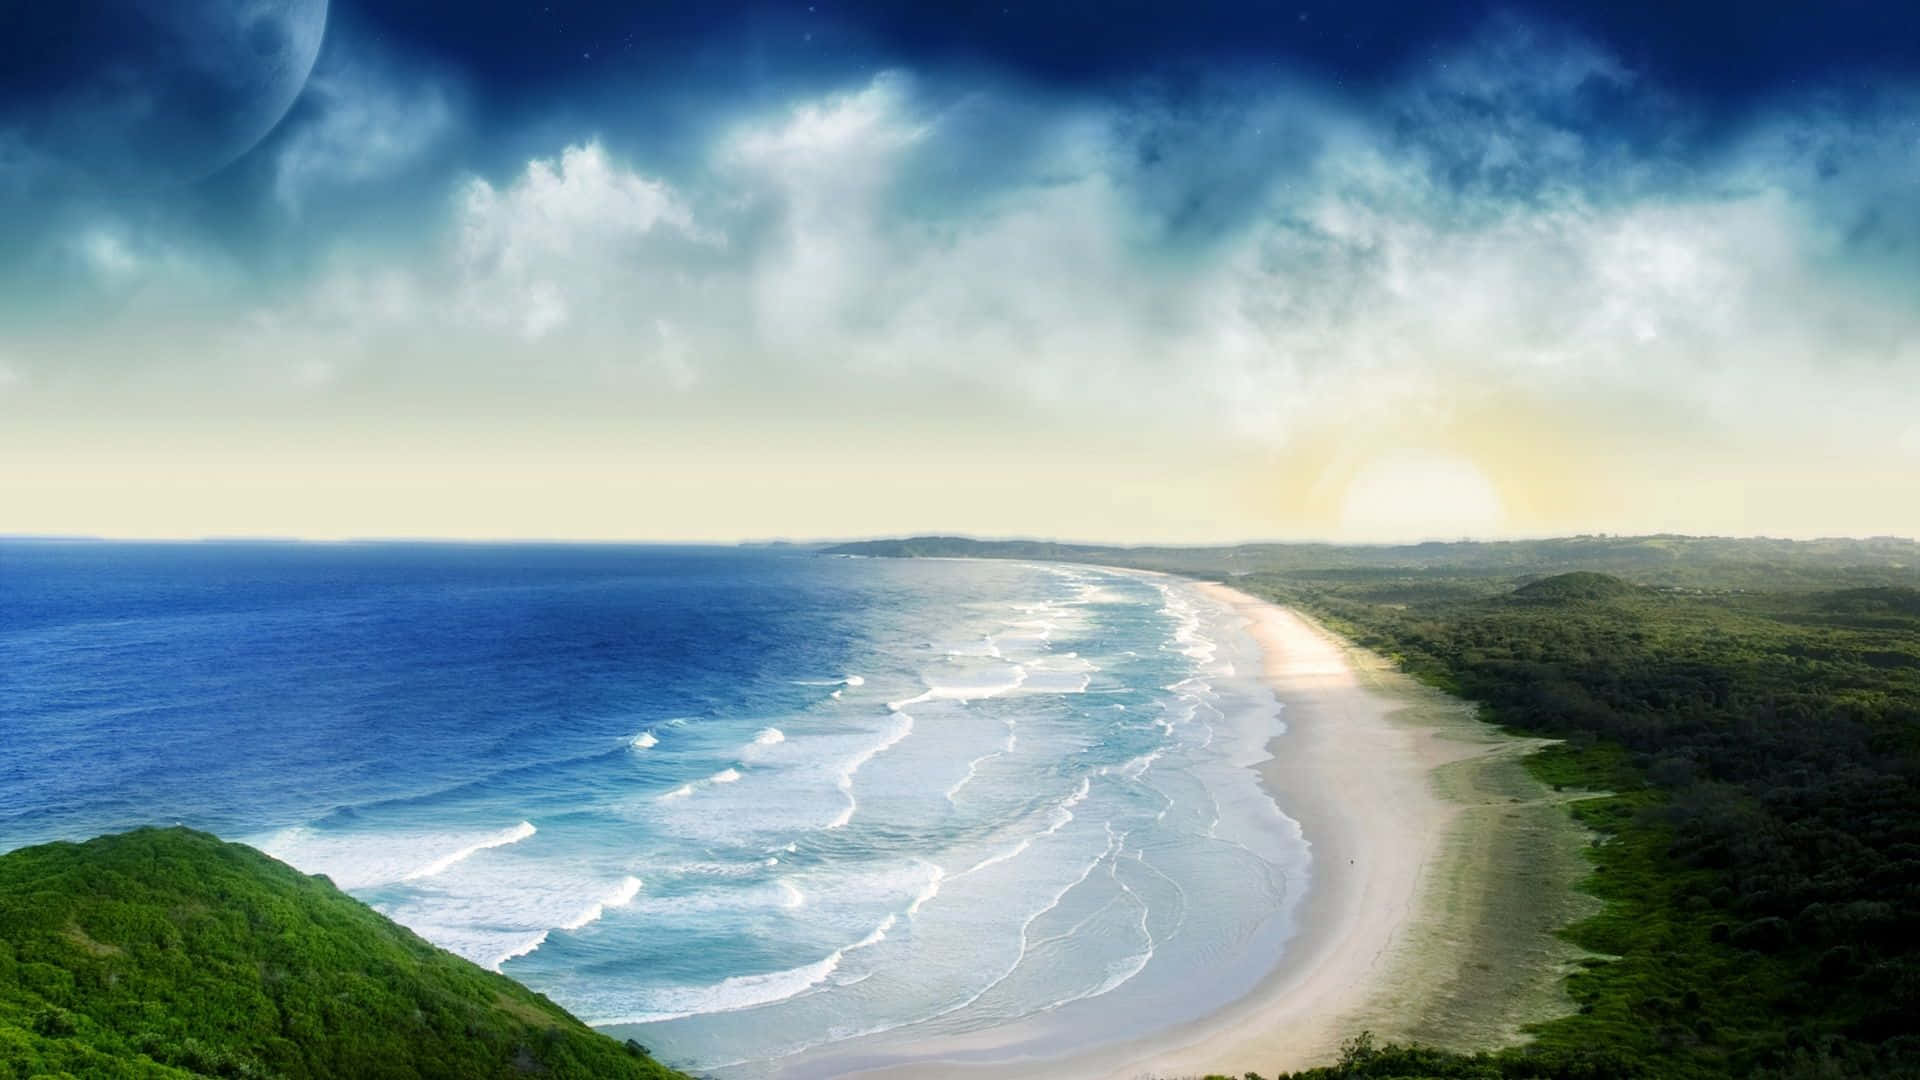 Wide Ocean From A Cliff As A Panoramic Desktop Background